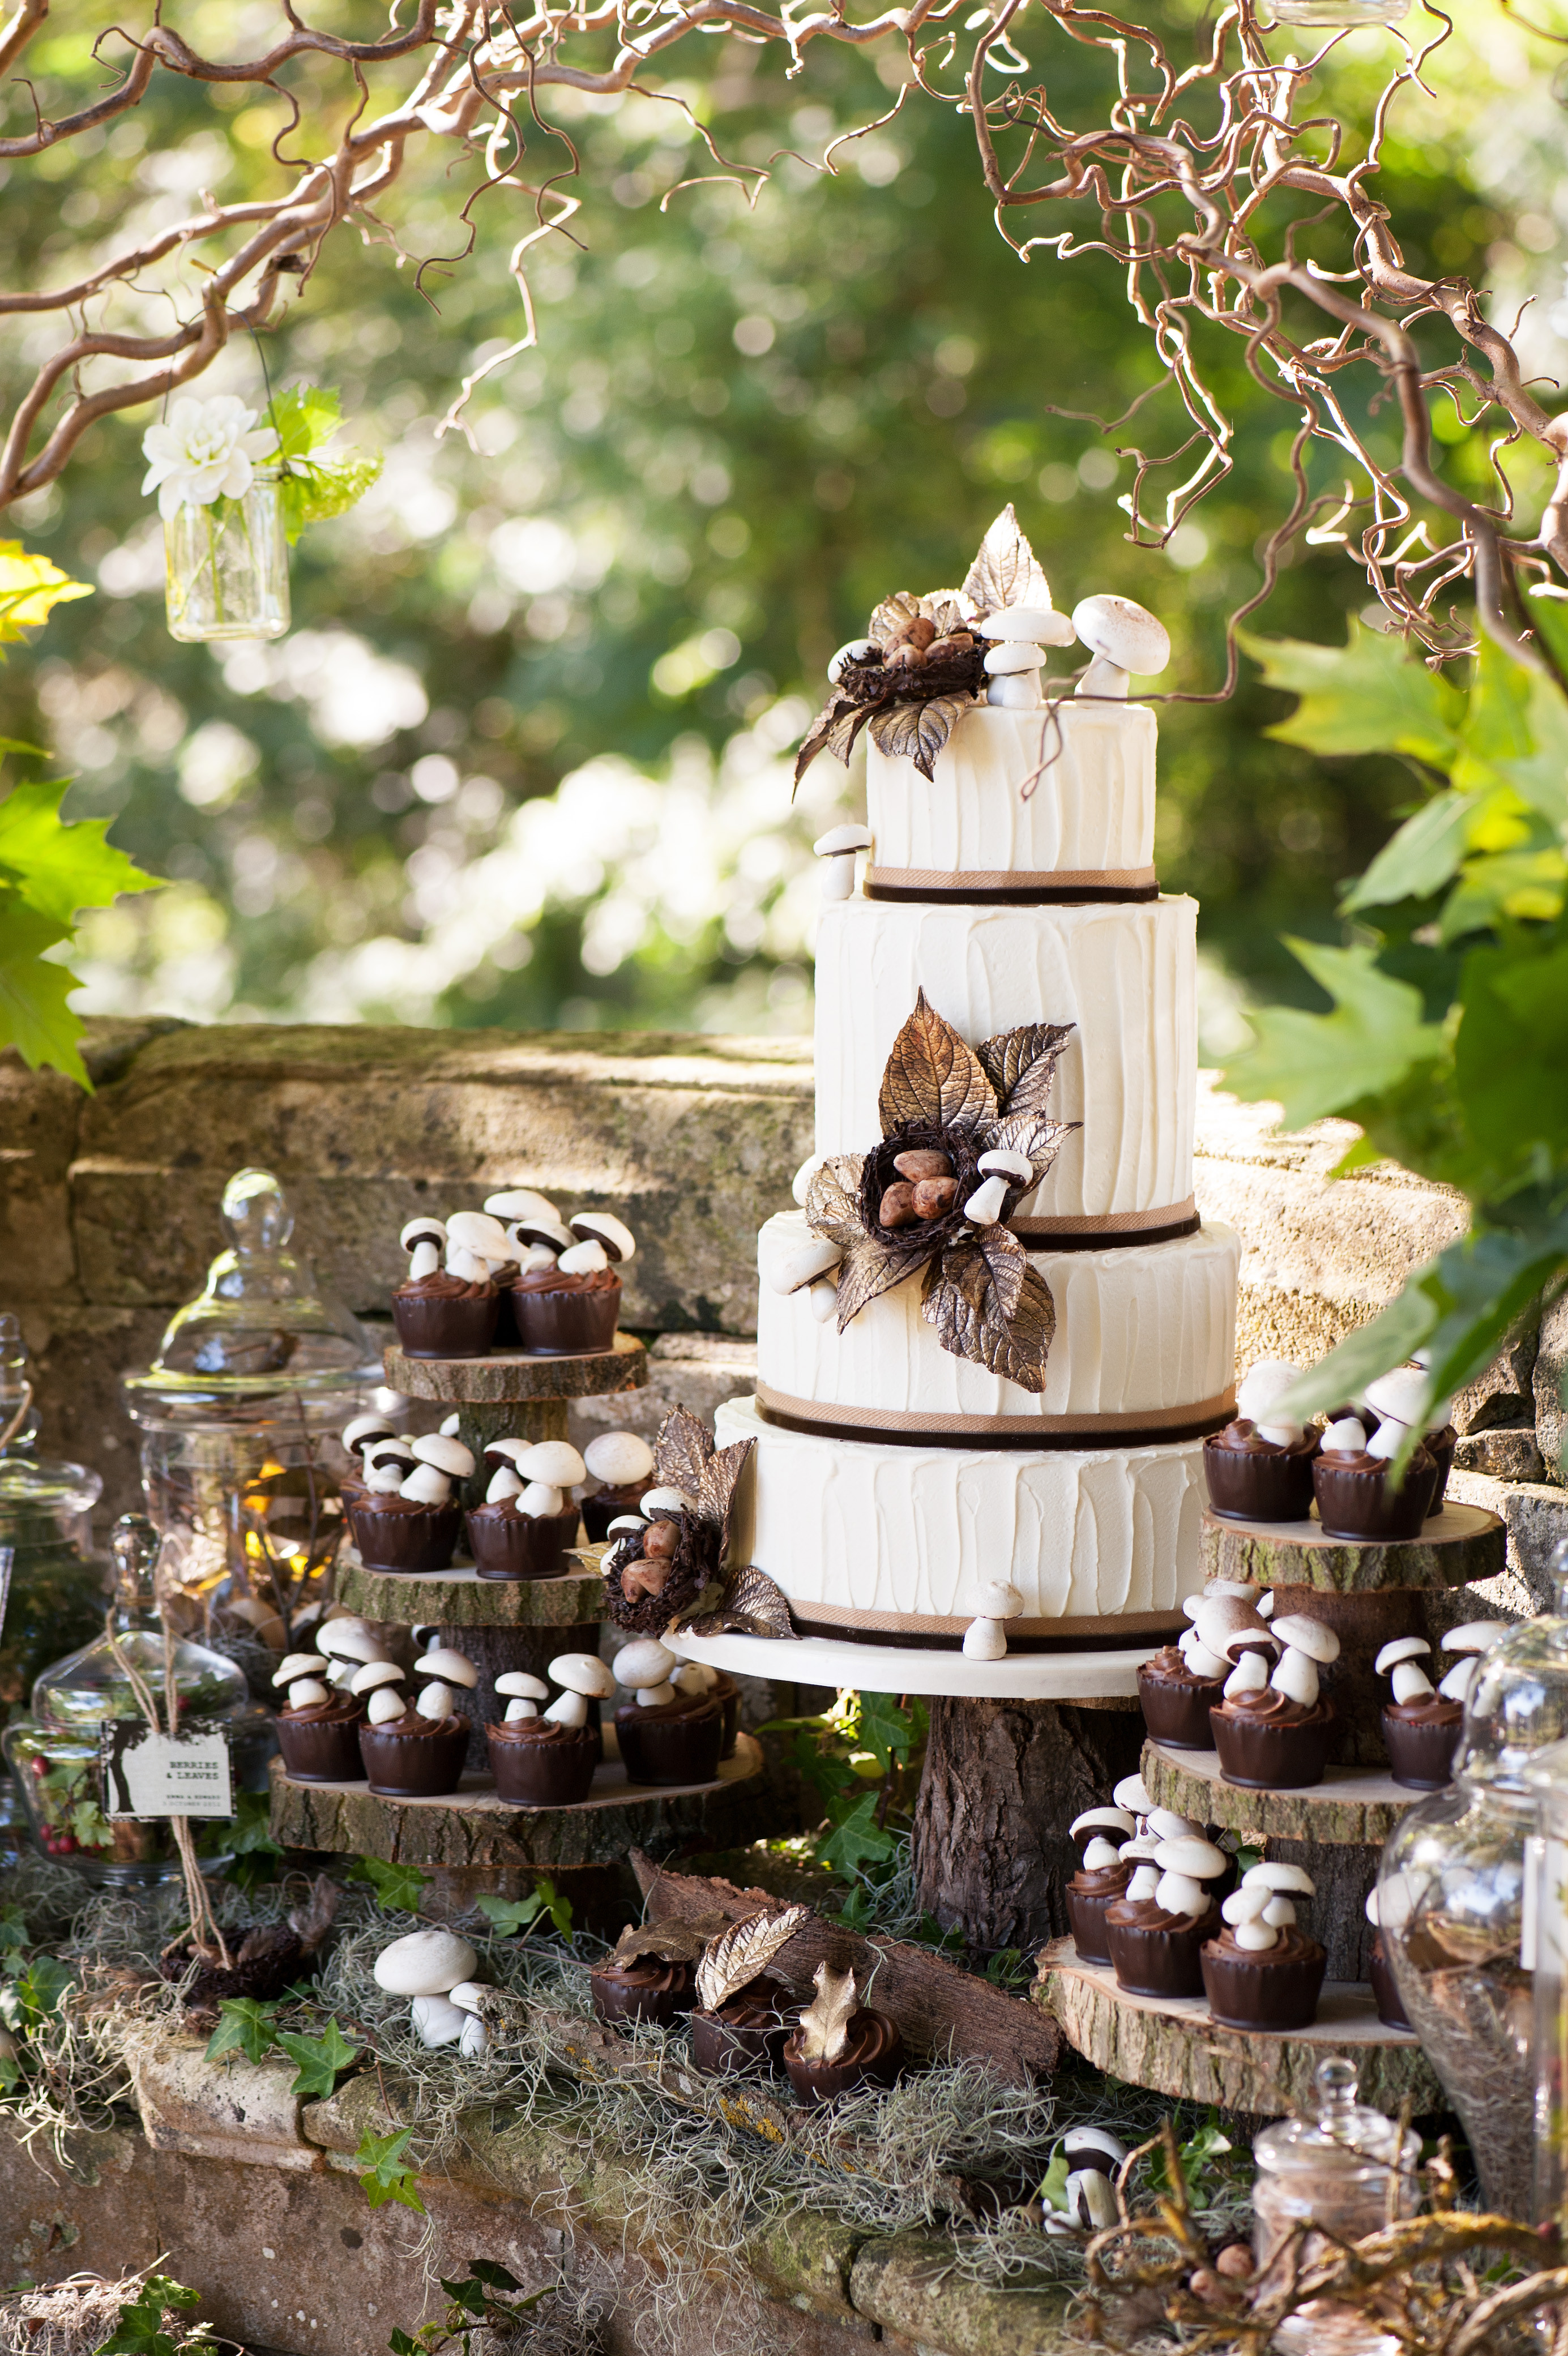 Rustic Themed Wedding Cakes
 Woodland Themed Wedding Cake Rustic Wedding Chic